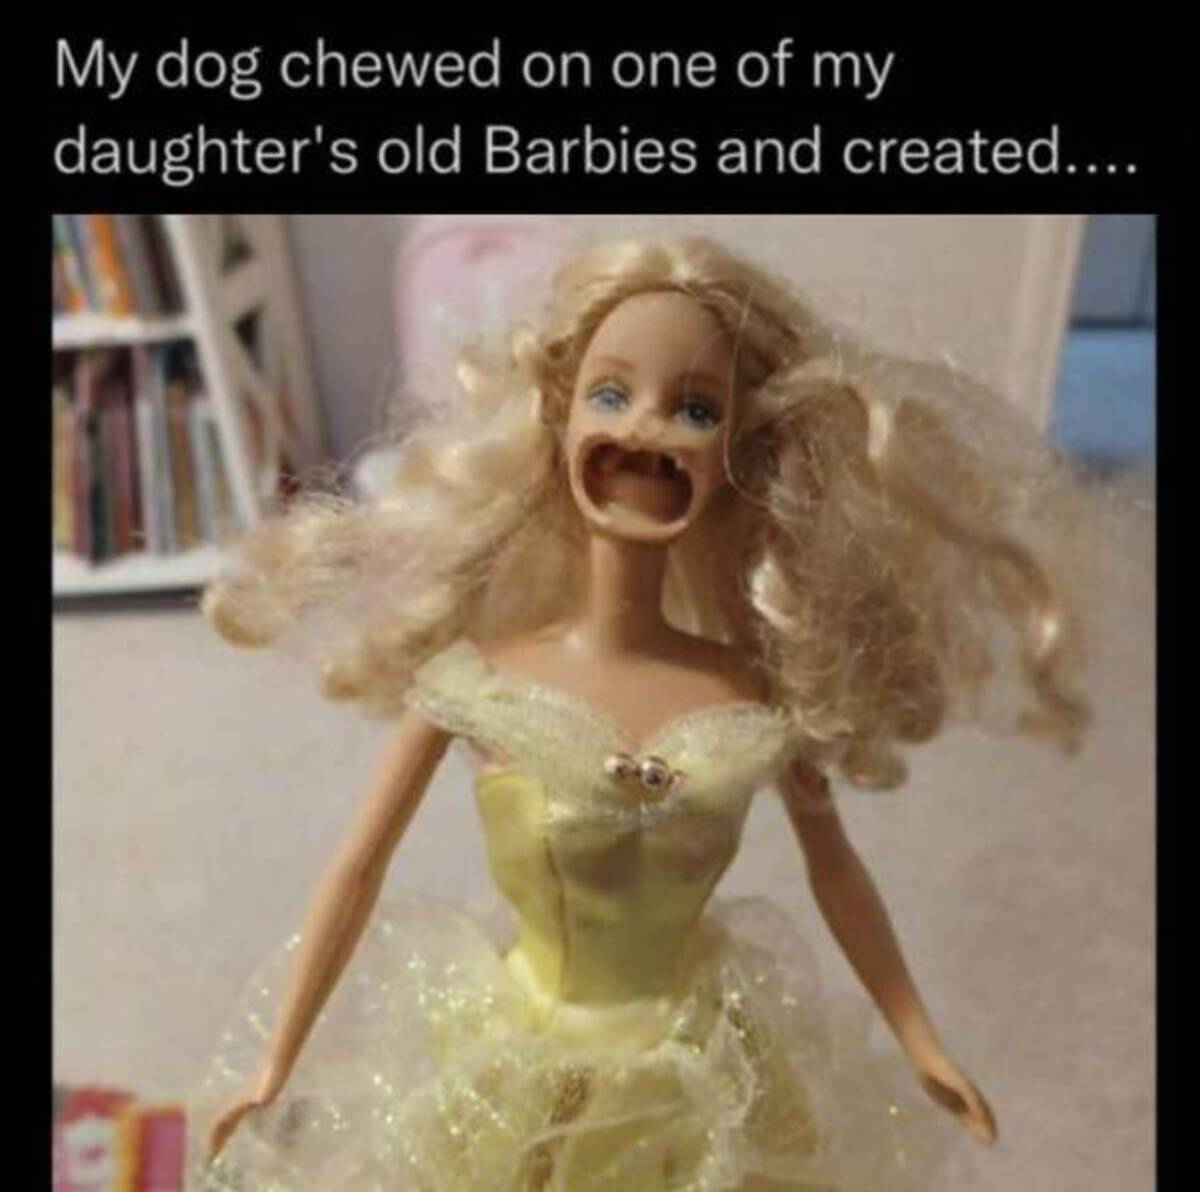 meme barbie doll - My dog chewed on one of my daughter's old Barbies and created....